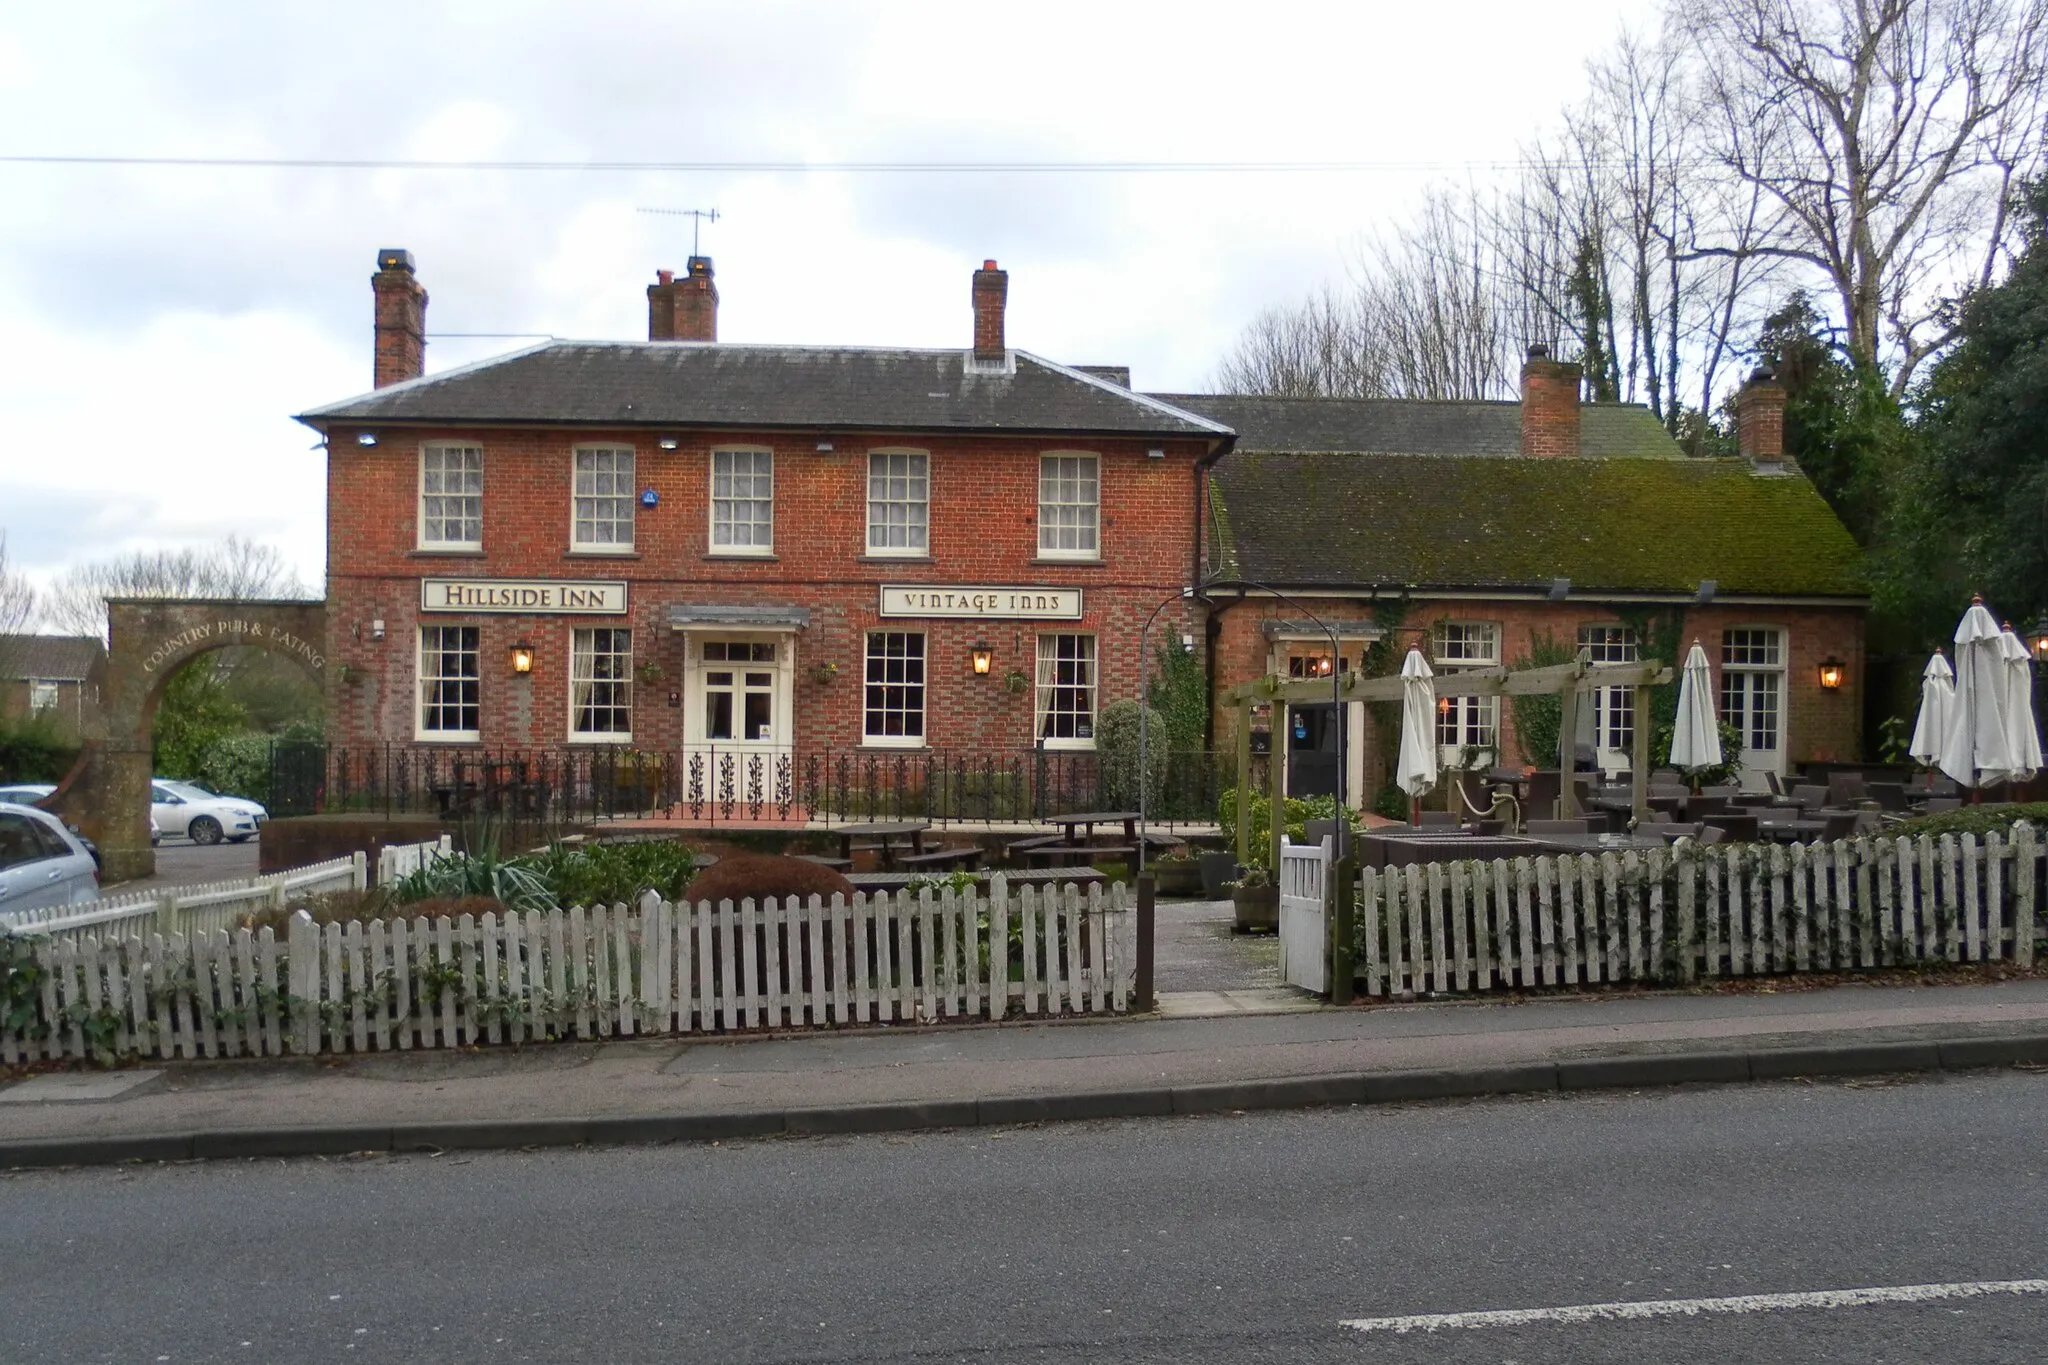 Photo showing: Hillside Inn, Balcombe Road, Pound Hill, Crawley, West Sussex, England. Listed at Grade II by English Heritage (IoE Code 363330)